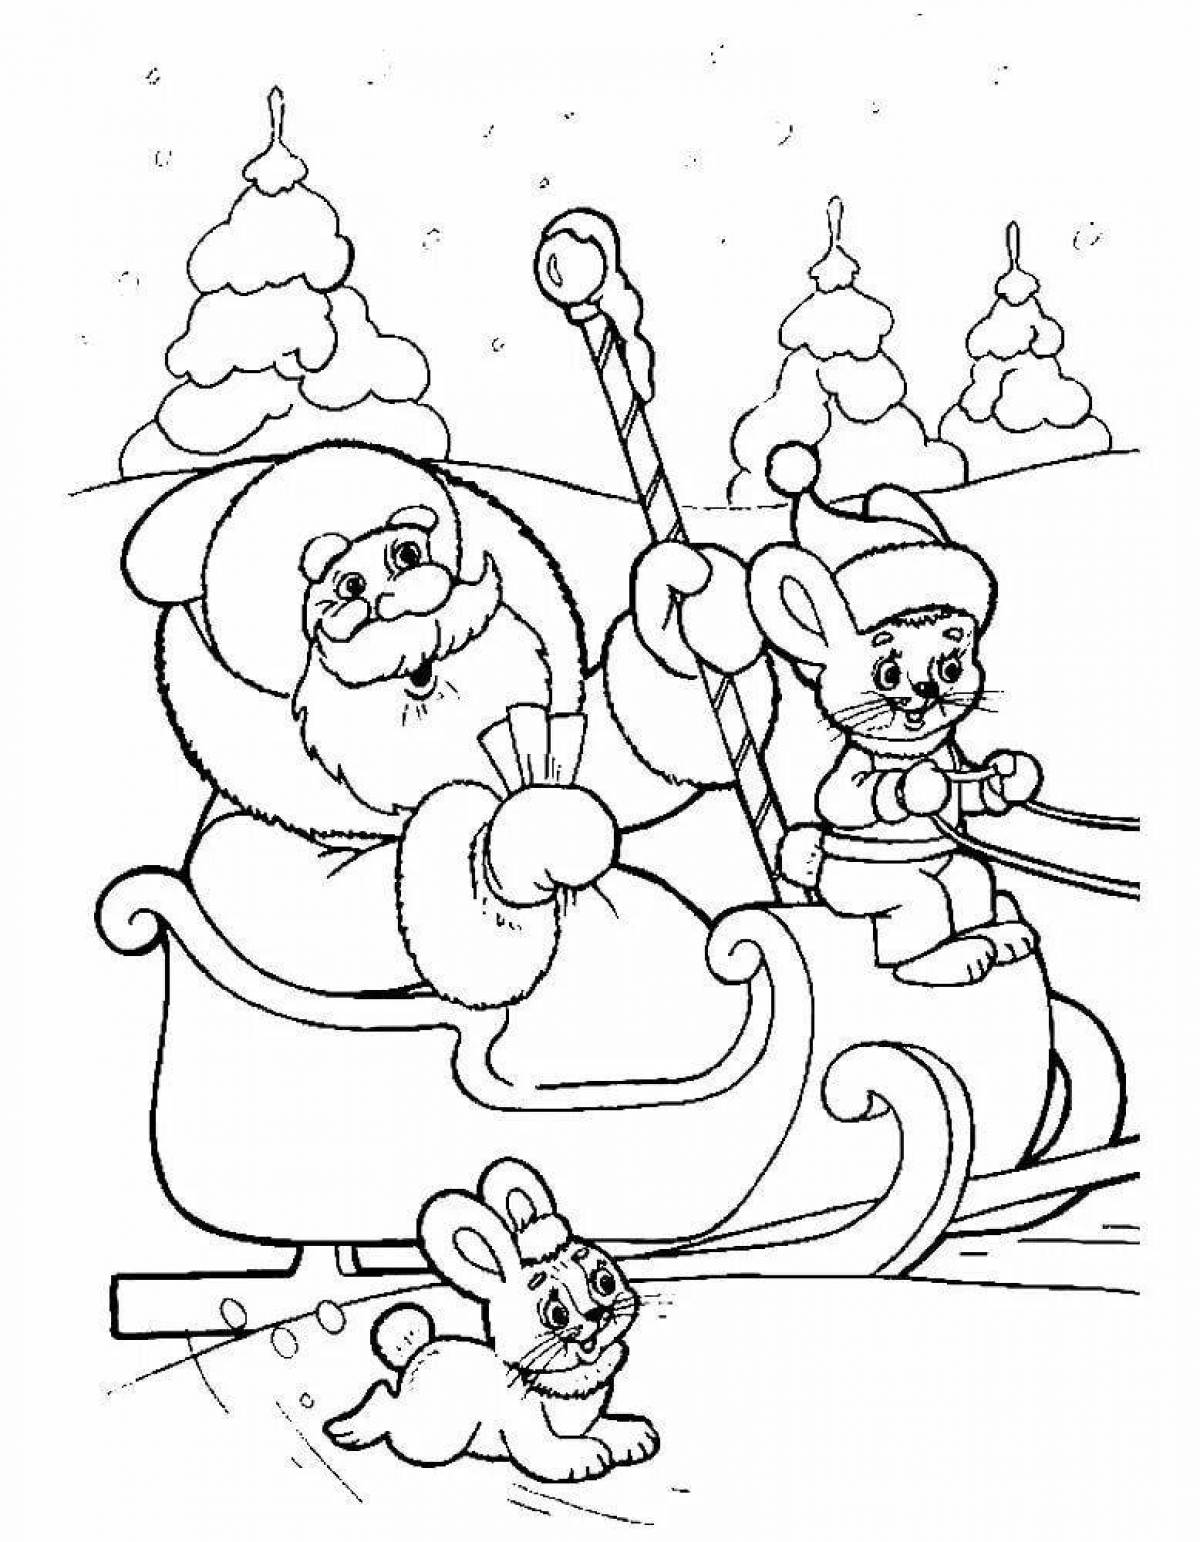 Coloring page glamorous Santa Claus on a sleigh